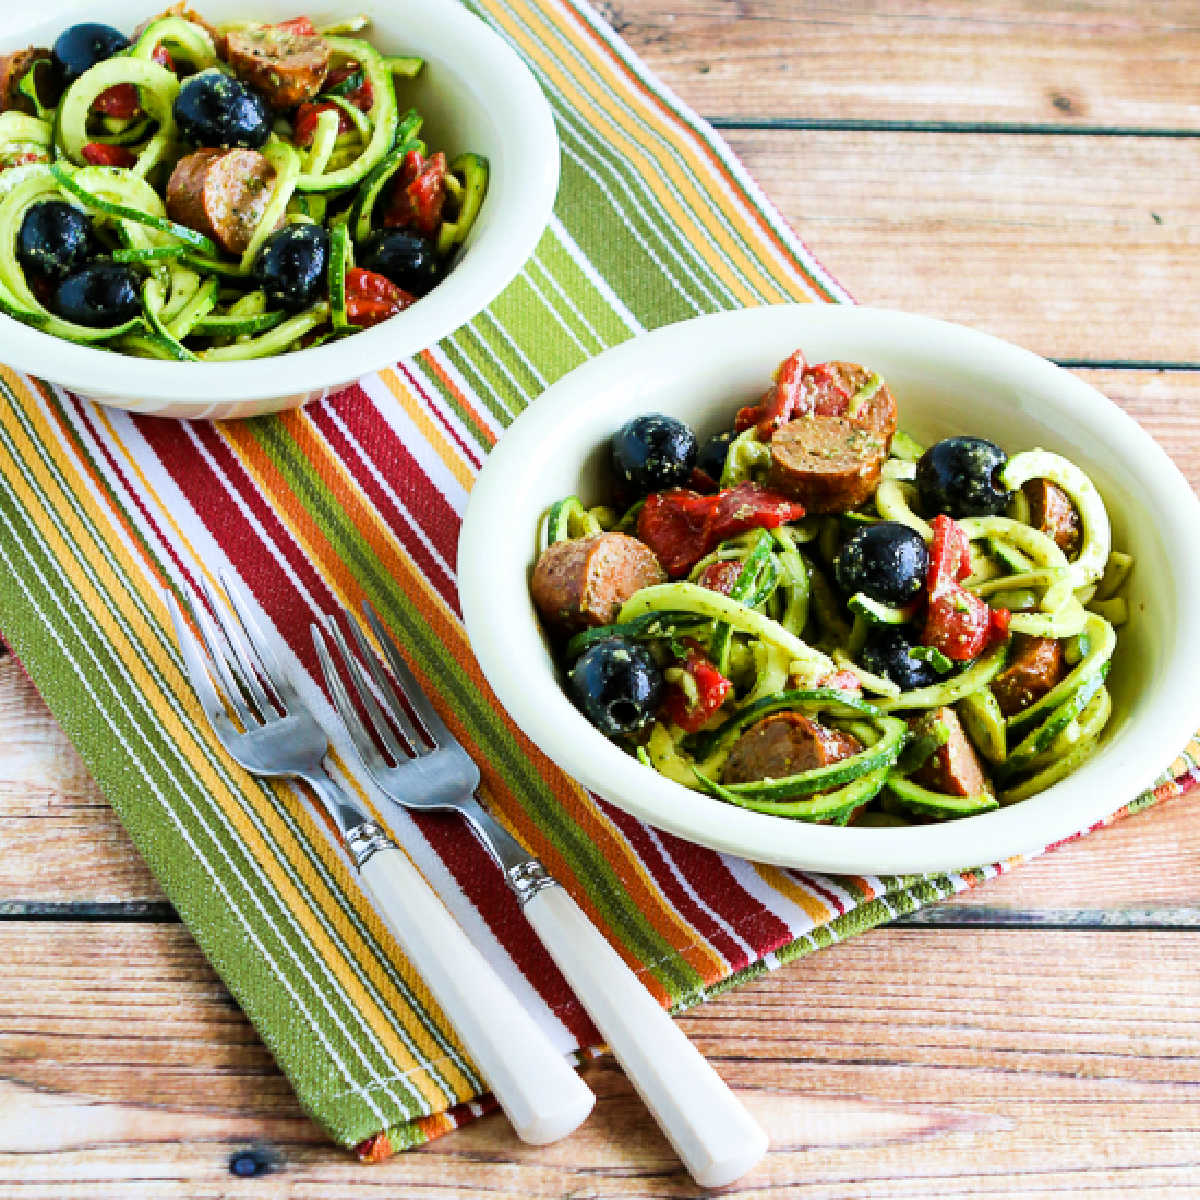 Zucchini Noodle Mock Pasta Salad shown in two bowls on striped napkin.